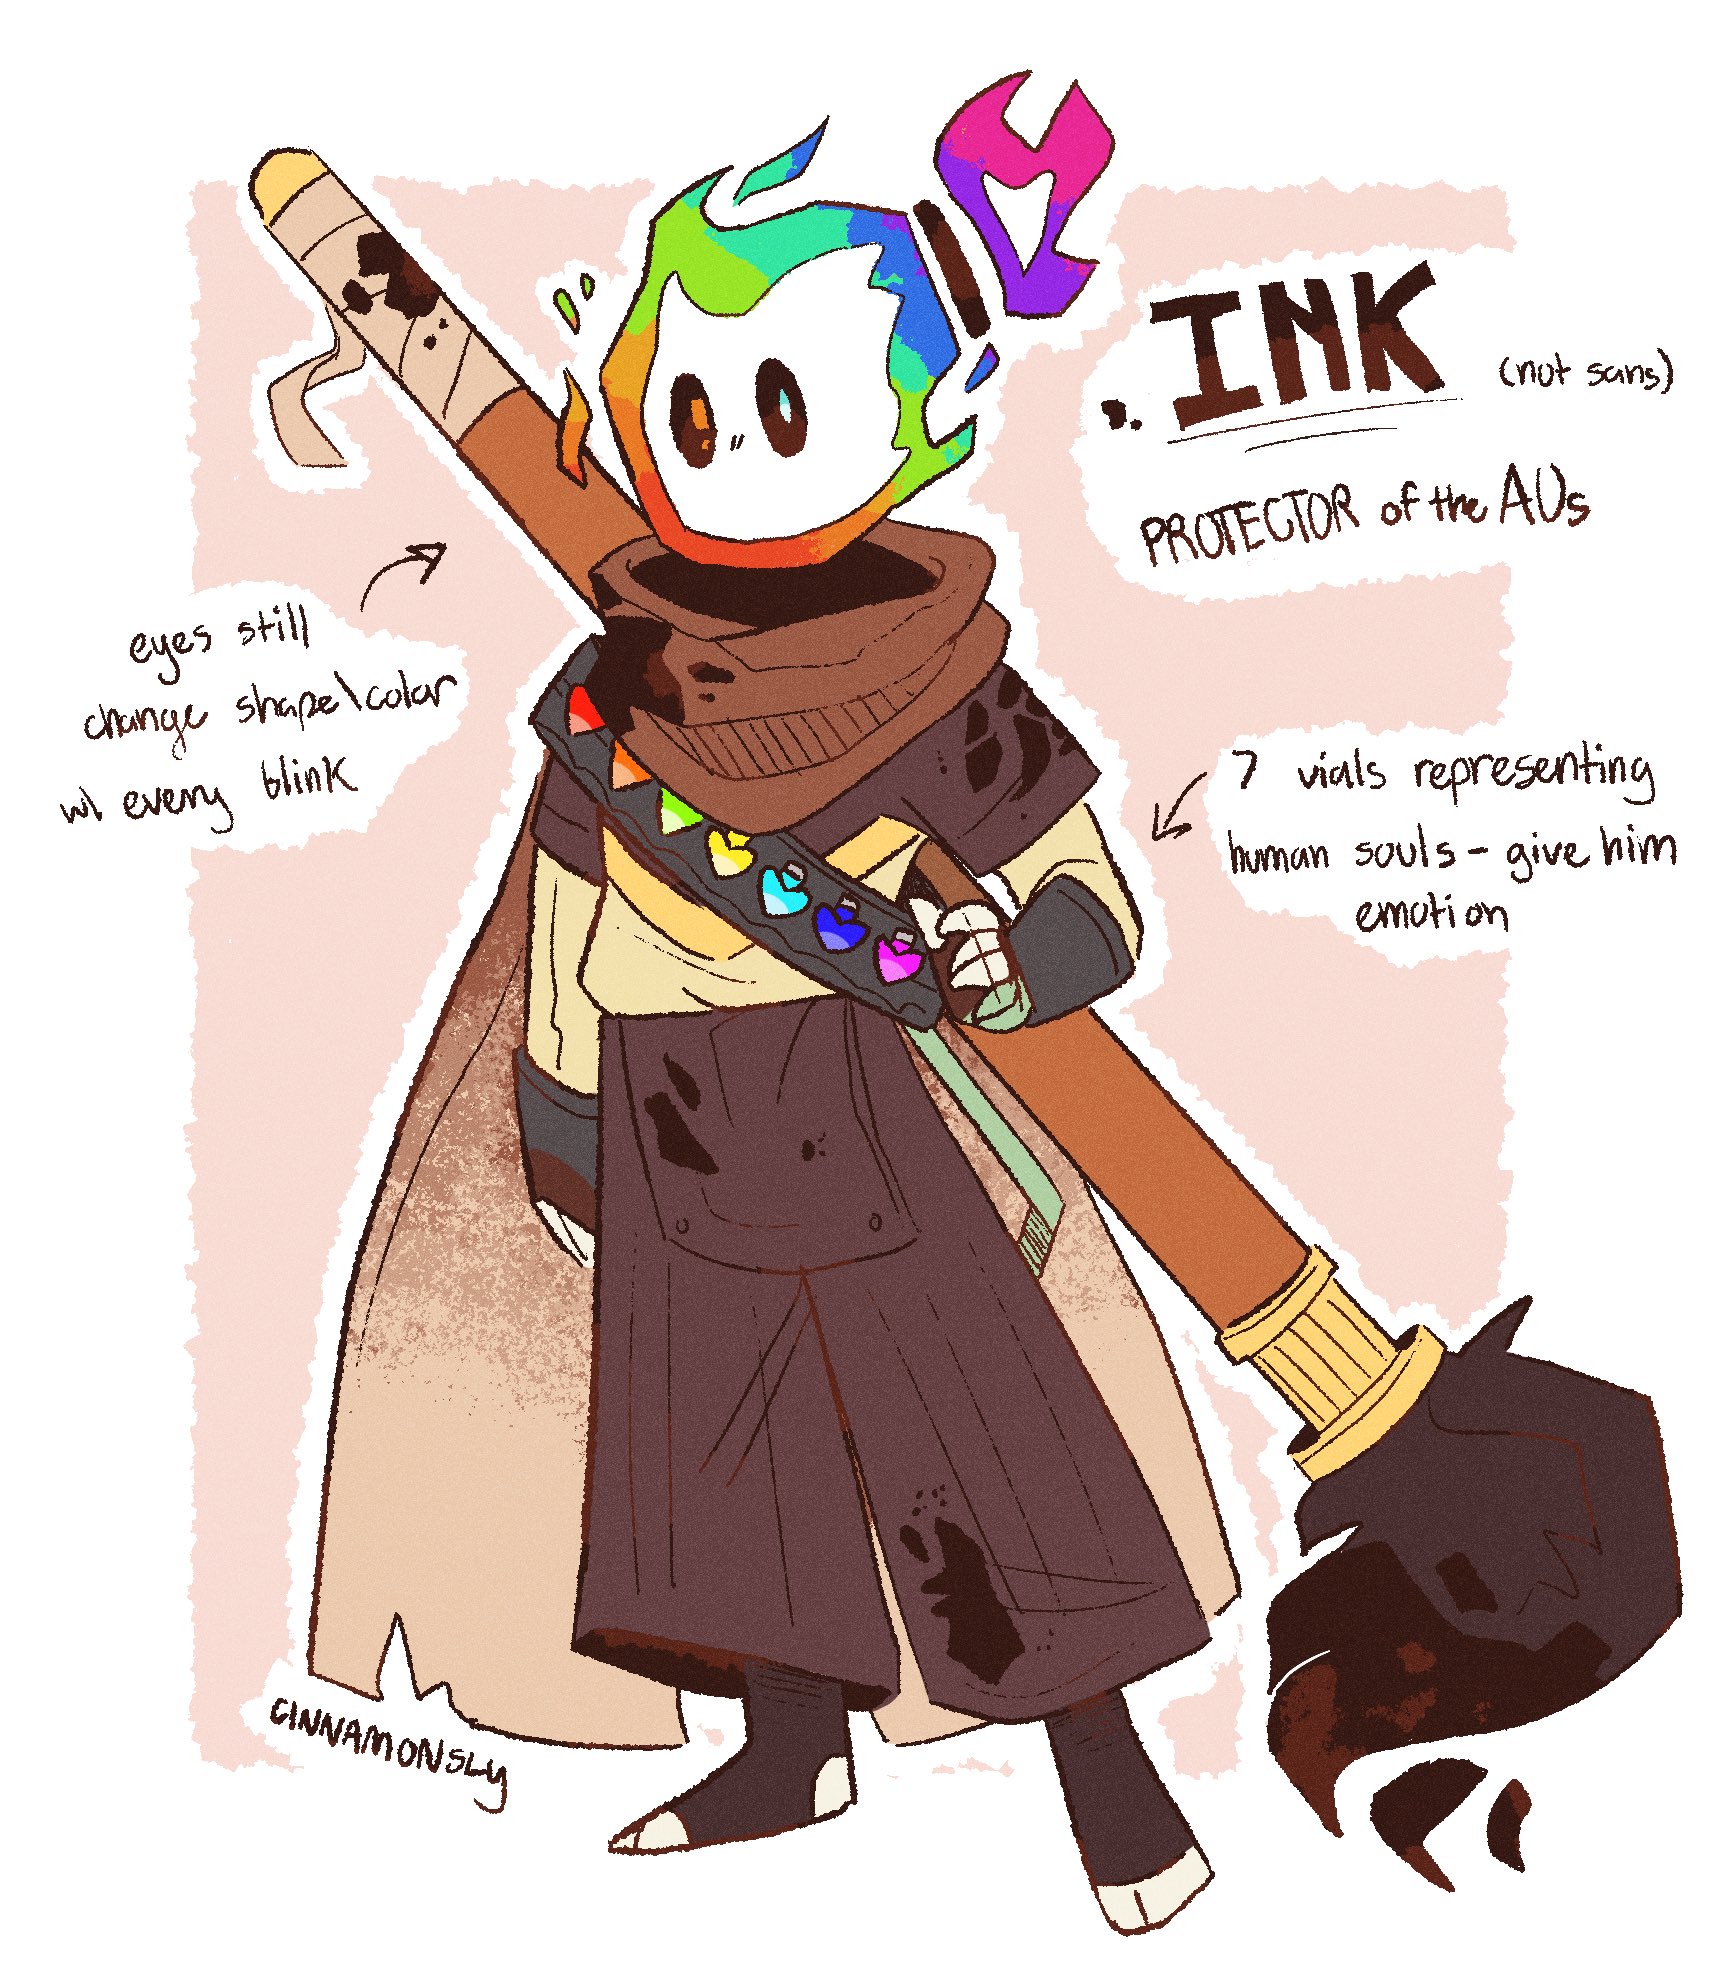 sly ❄️🎄 on X: ink sans has been a hot topic on the tl lately so i tried  redesigning him into a completely unique character, aka not based on  anyone. idk he's